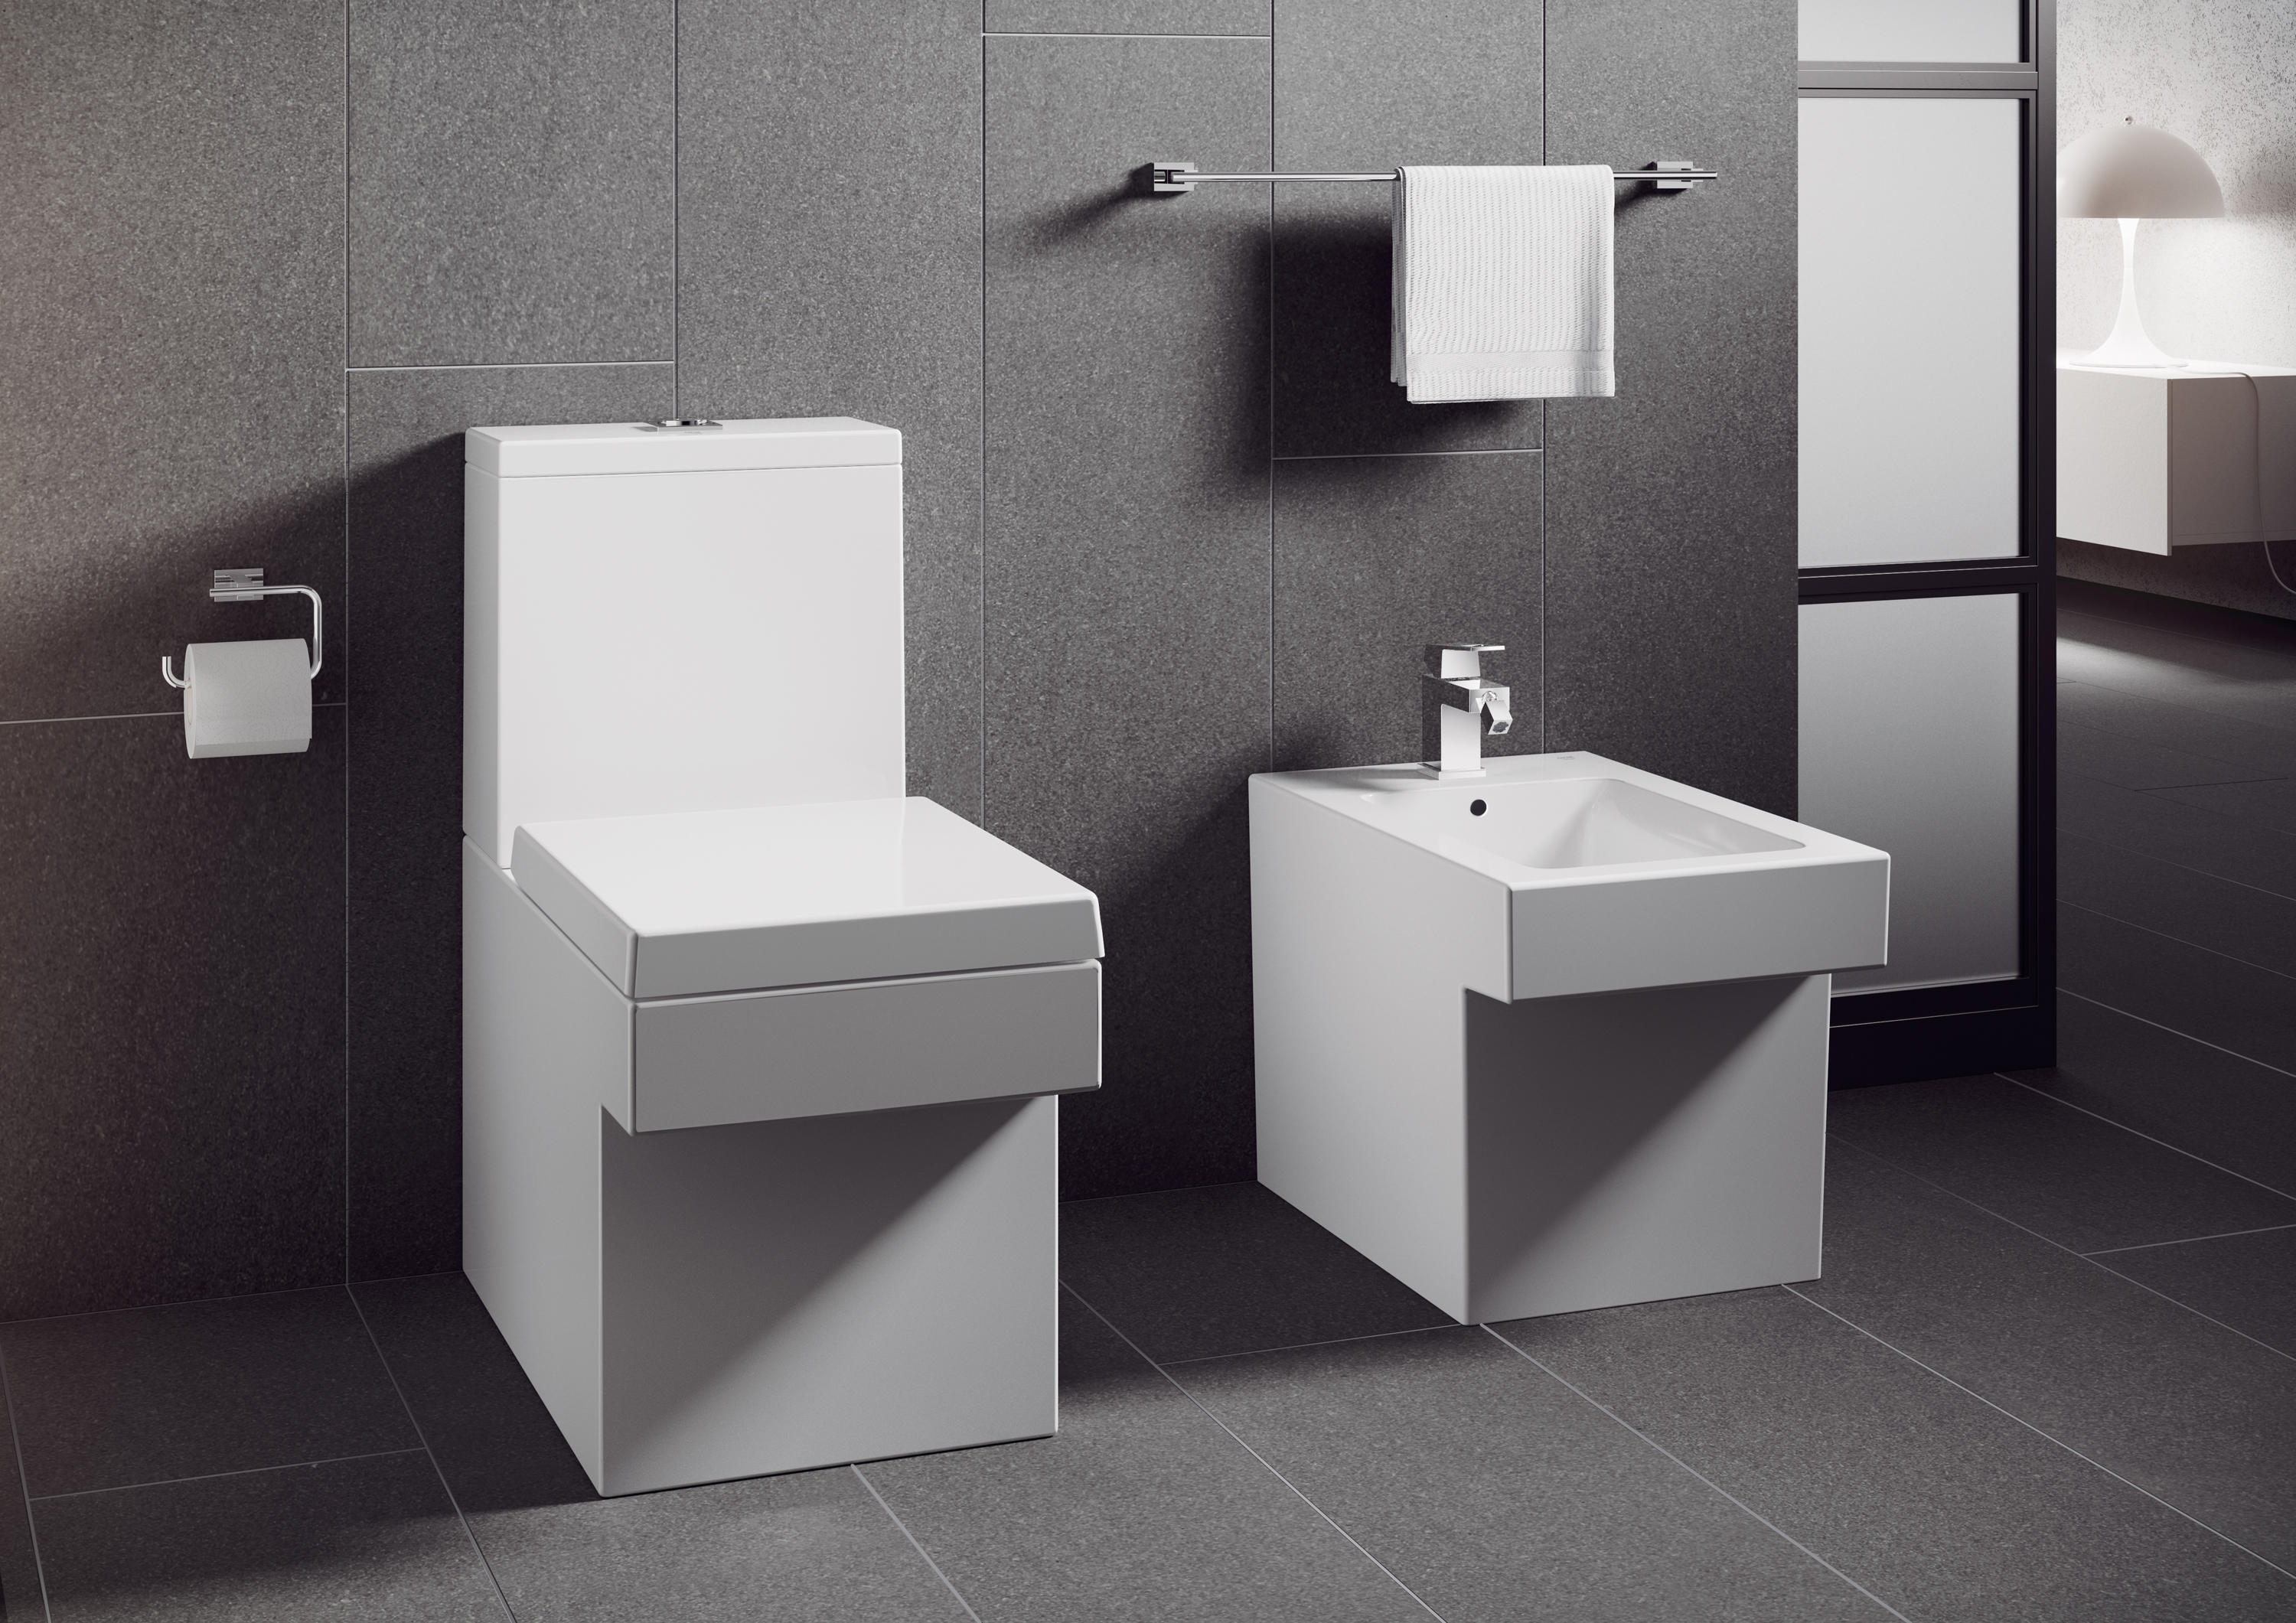 Унитаз grohe напольный. Grohe Essentials Cube 40507001. Grohe Cube Ceramic. Grohe Cube Ceramic раковина. Grohe Essentials Cube 40510001.